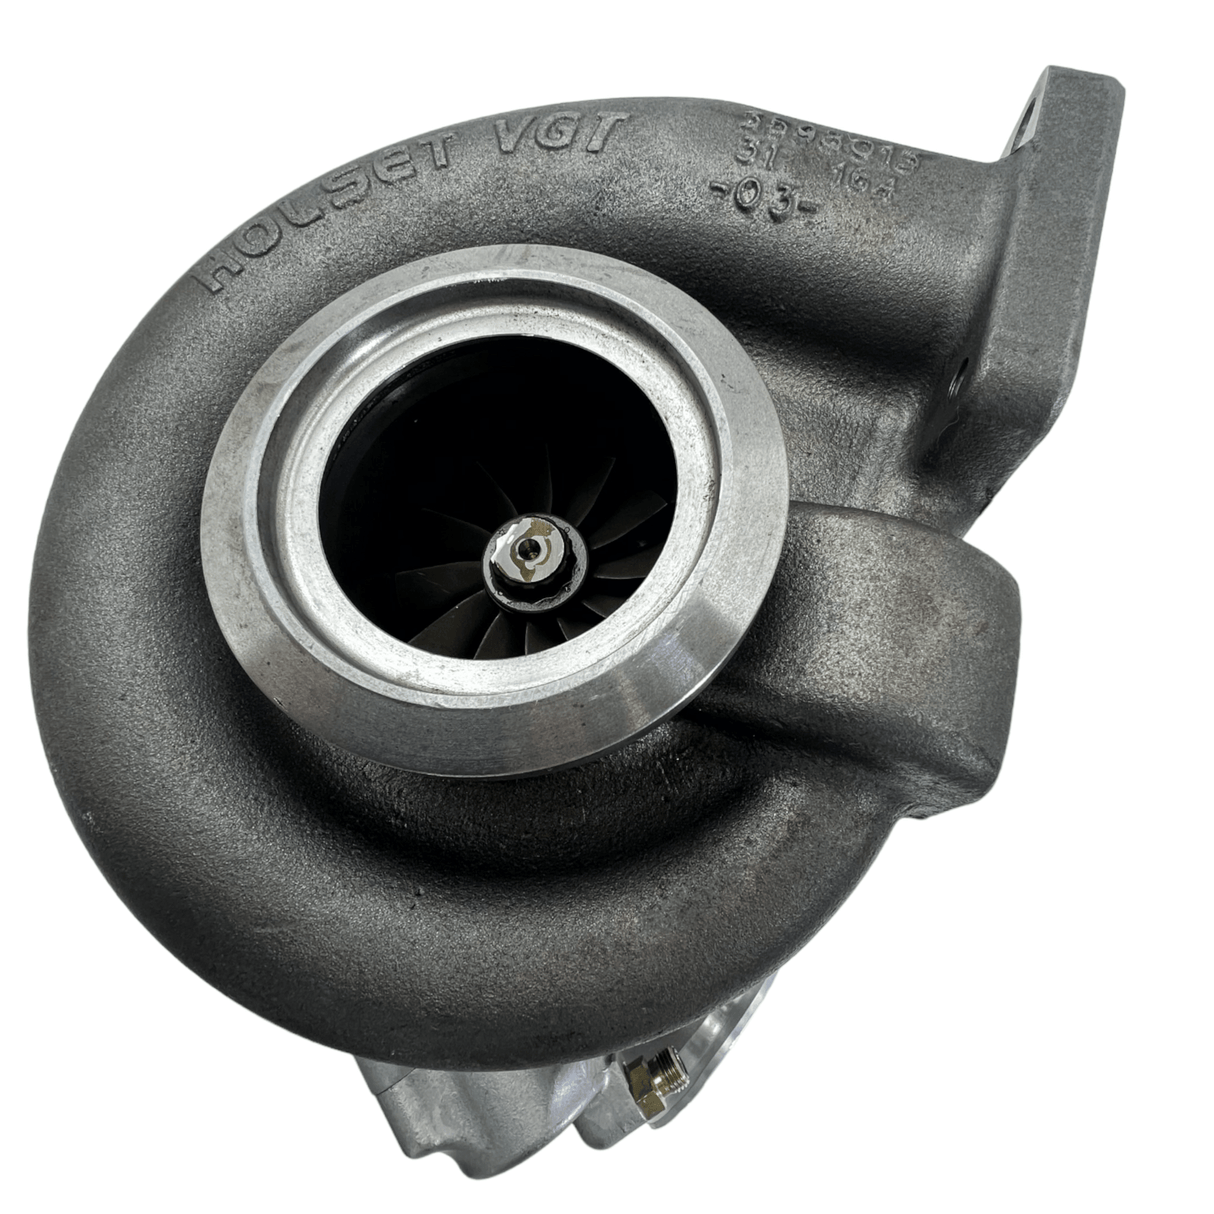 2881993Rx 2881993 Oem Cummins Turbocharger With Actuator For Isx Qsx15 No Core Charge.